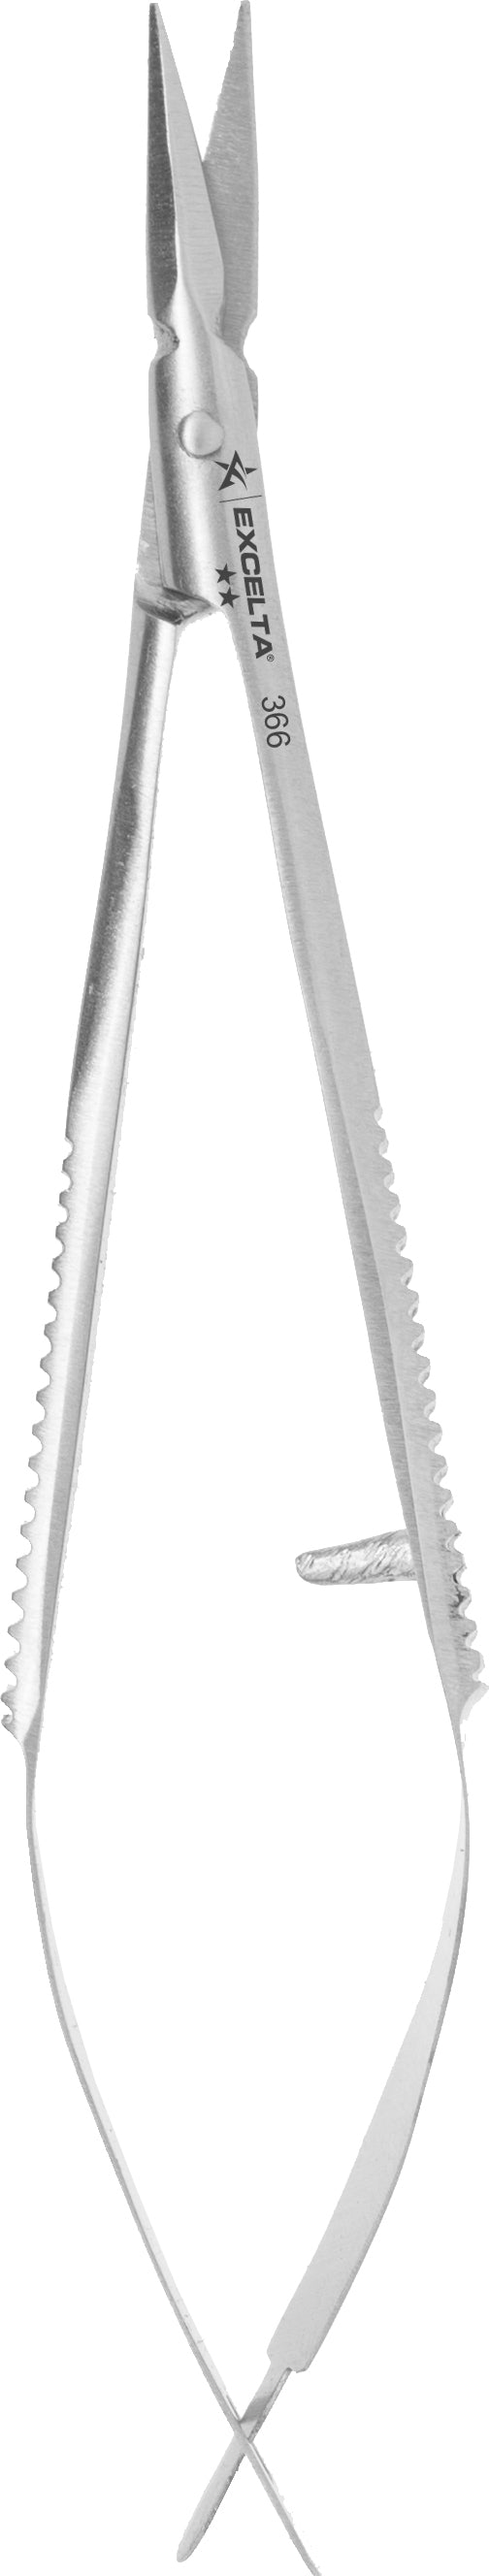 Excelta 366 Scissors - Micro Self-Opening - Straight -- SS - Blade Length .19"(4.75Mm)